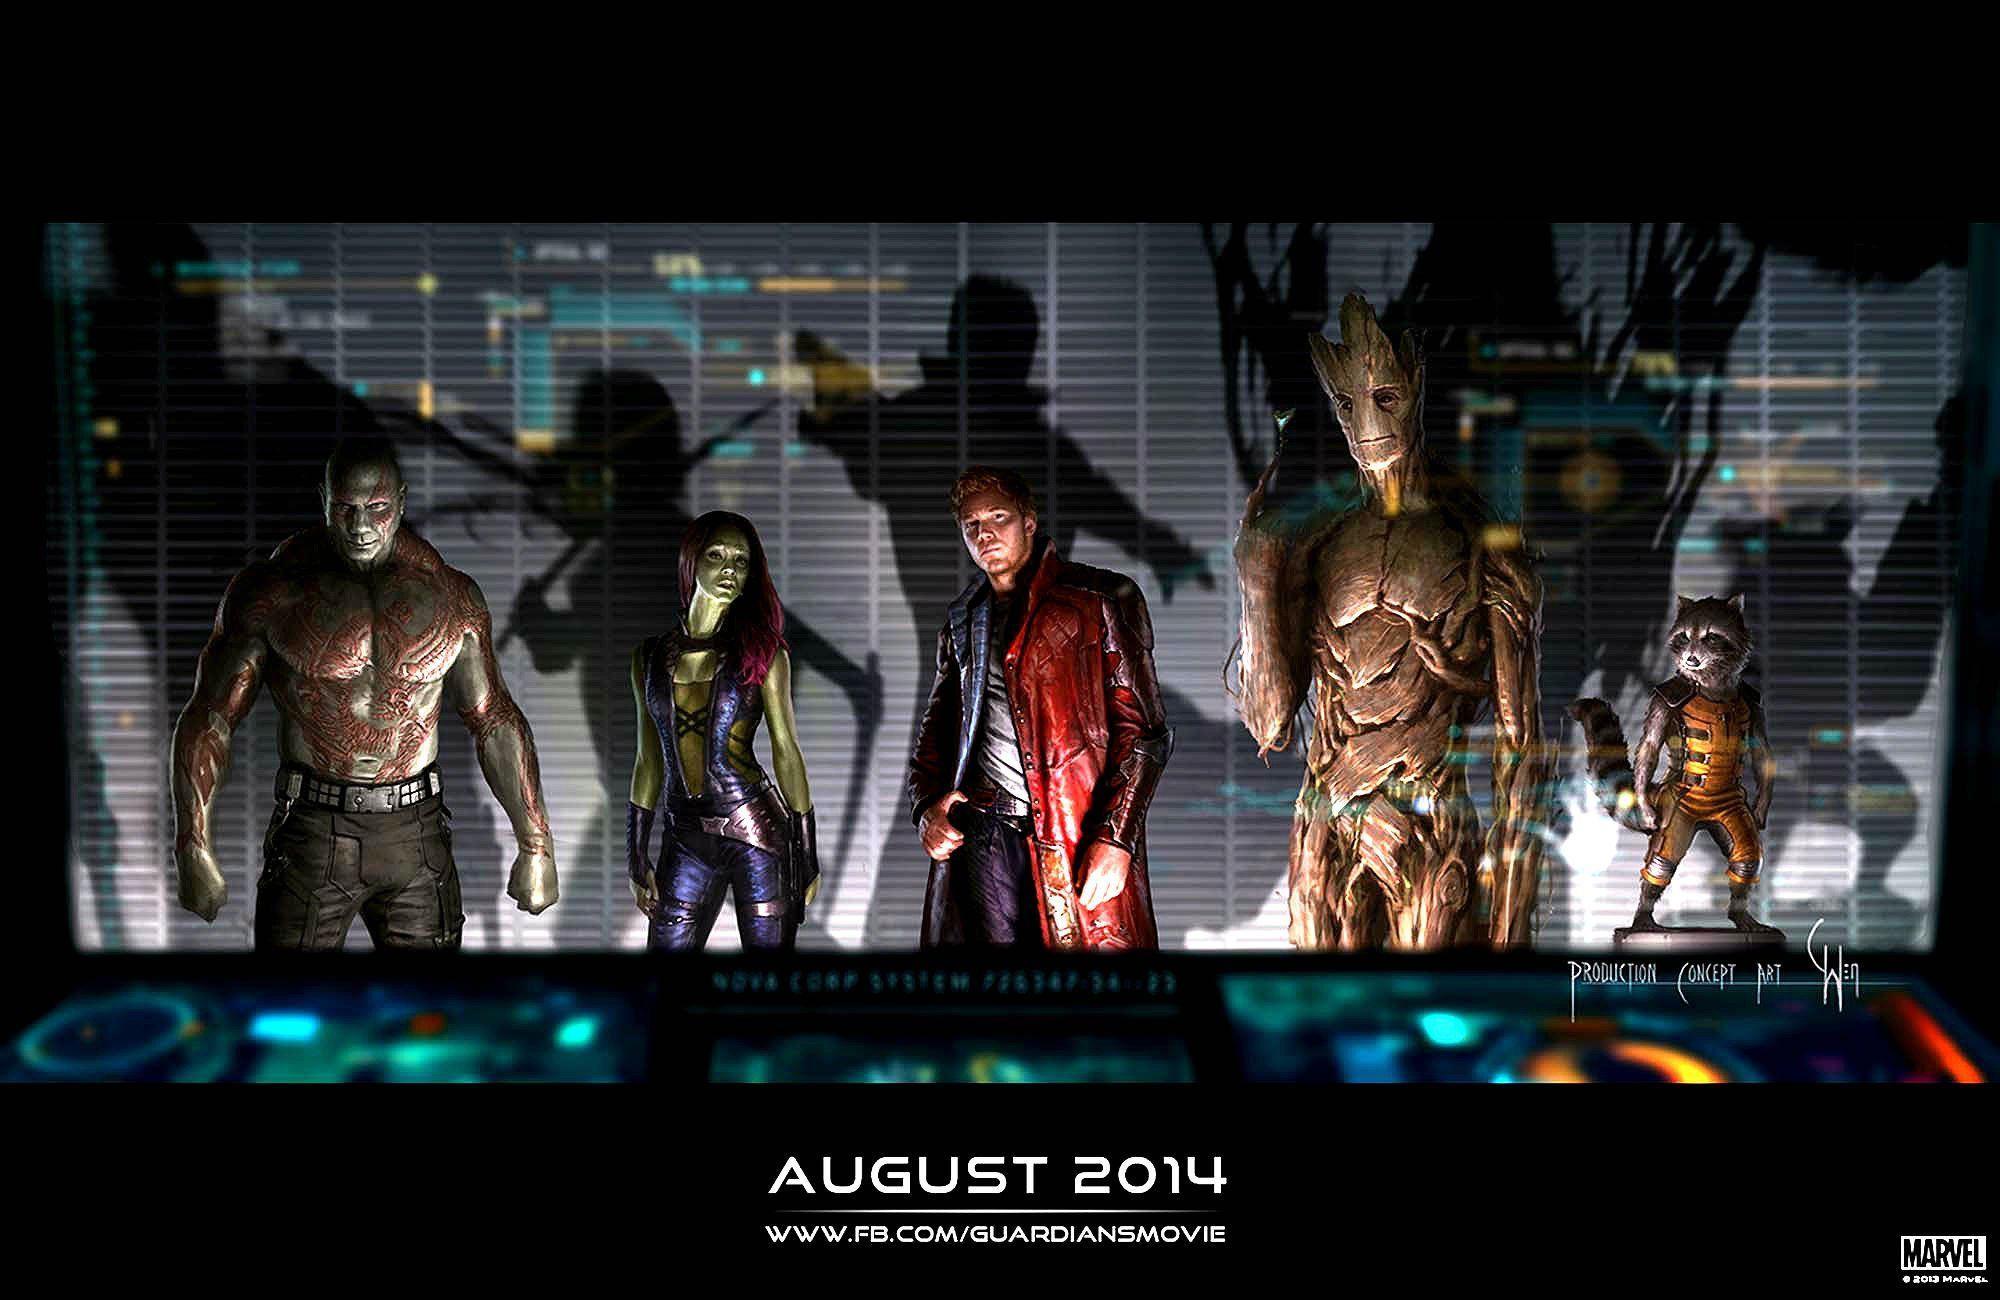 image about Guardians of the Galaxy